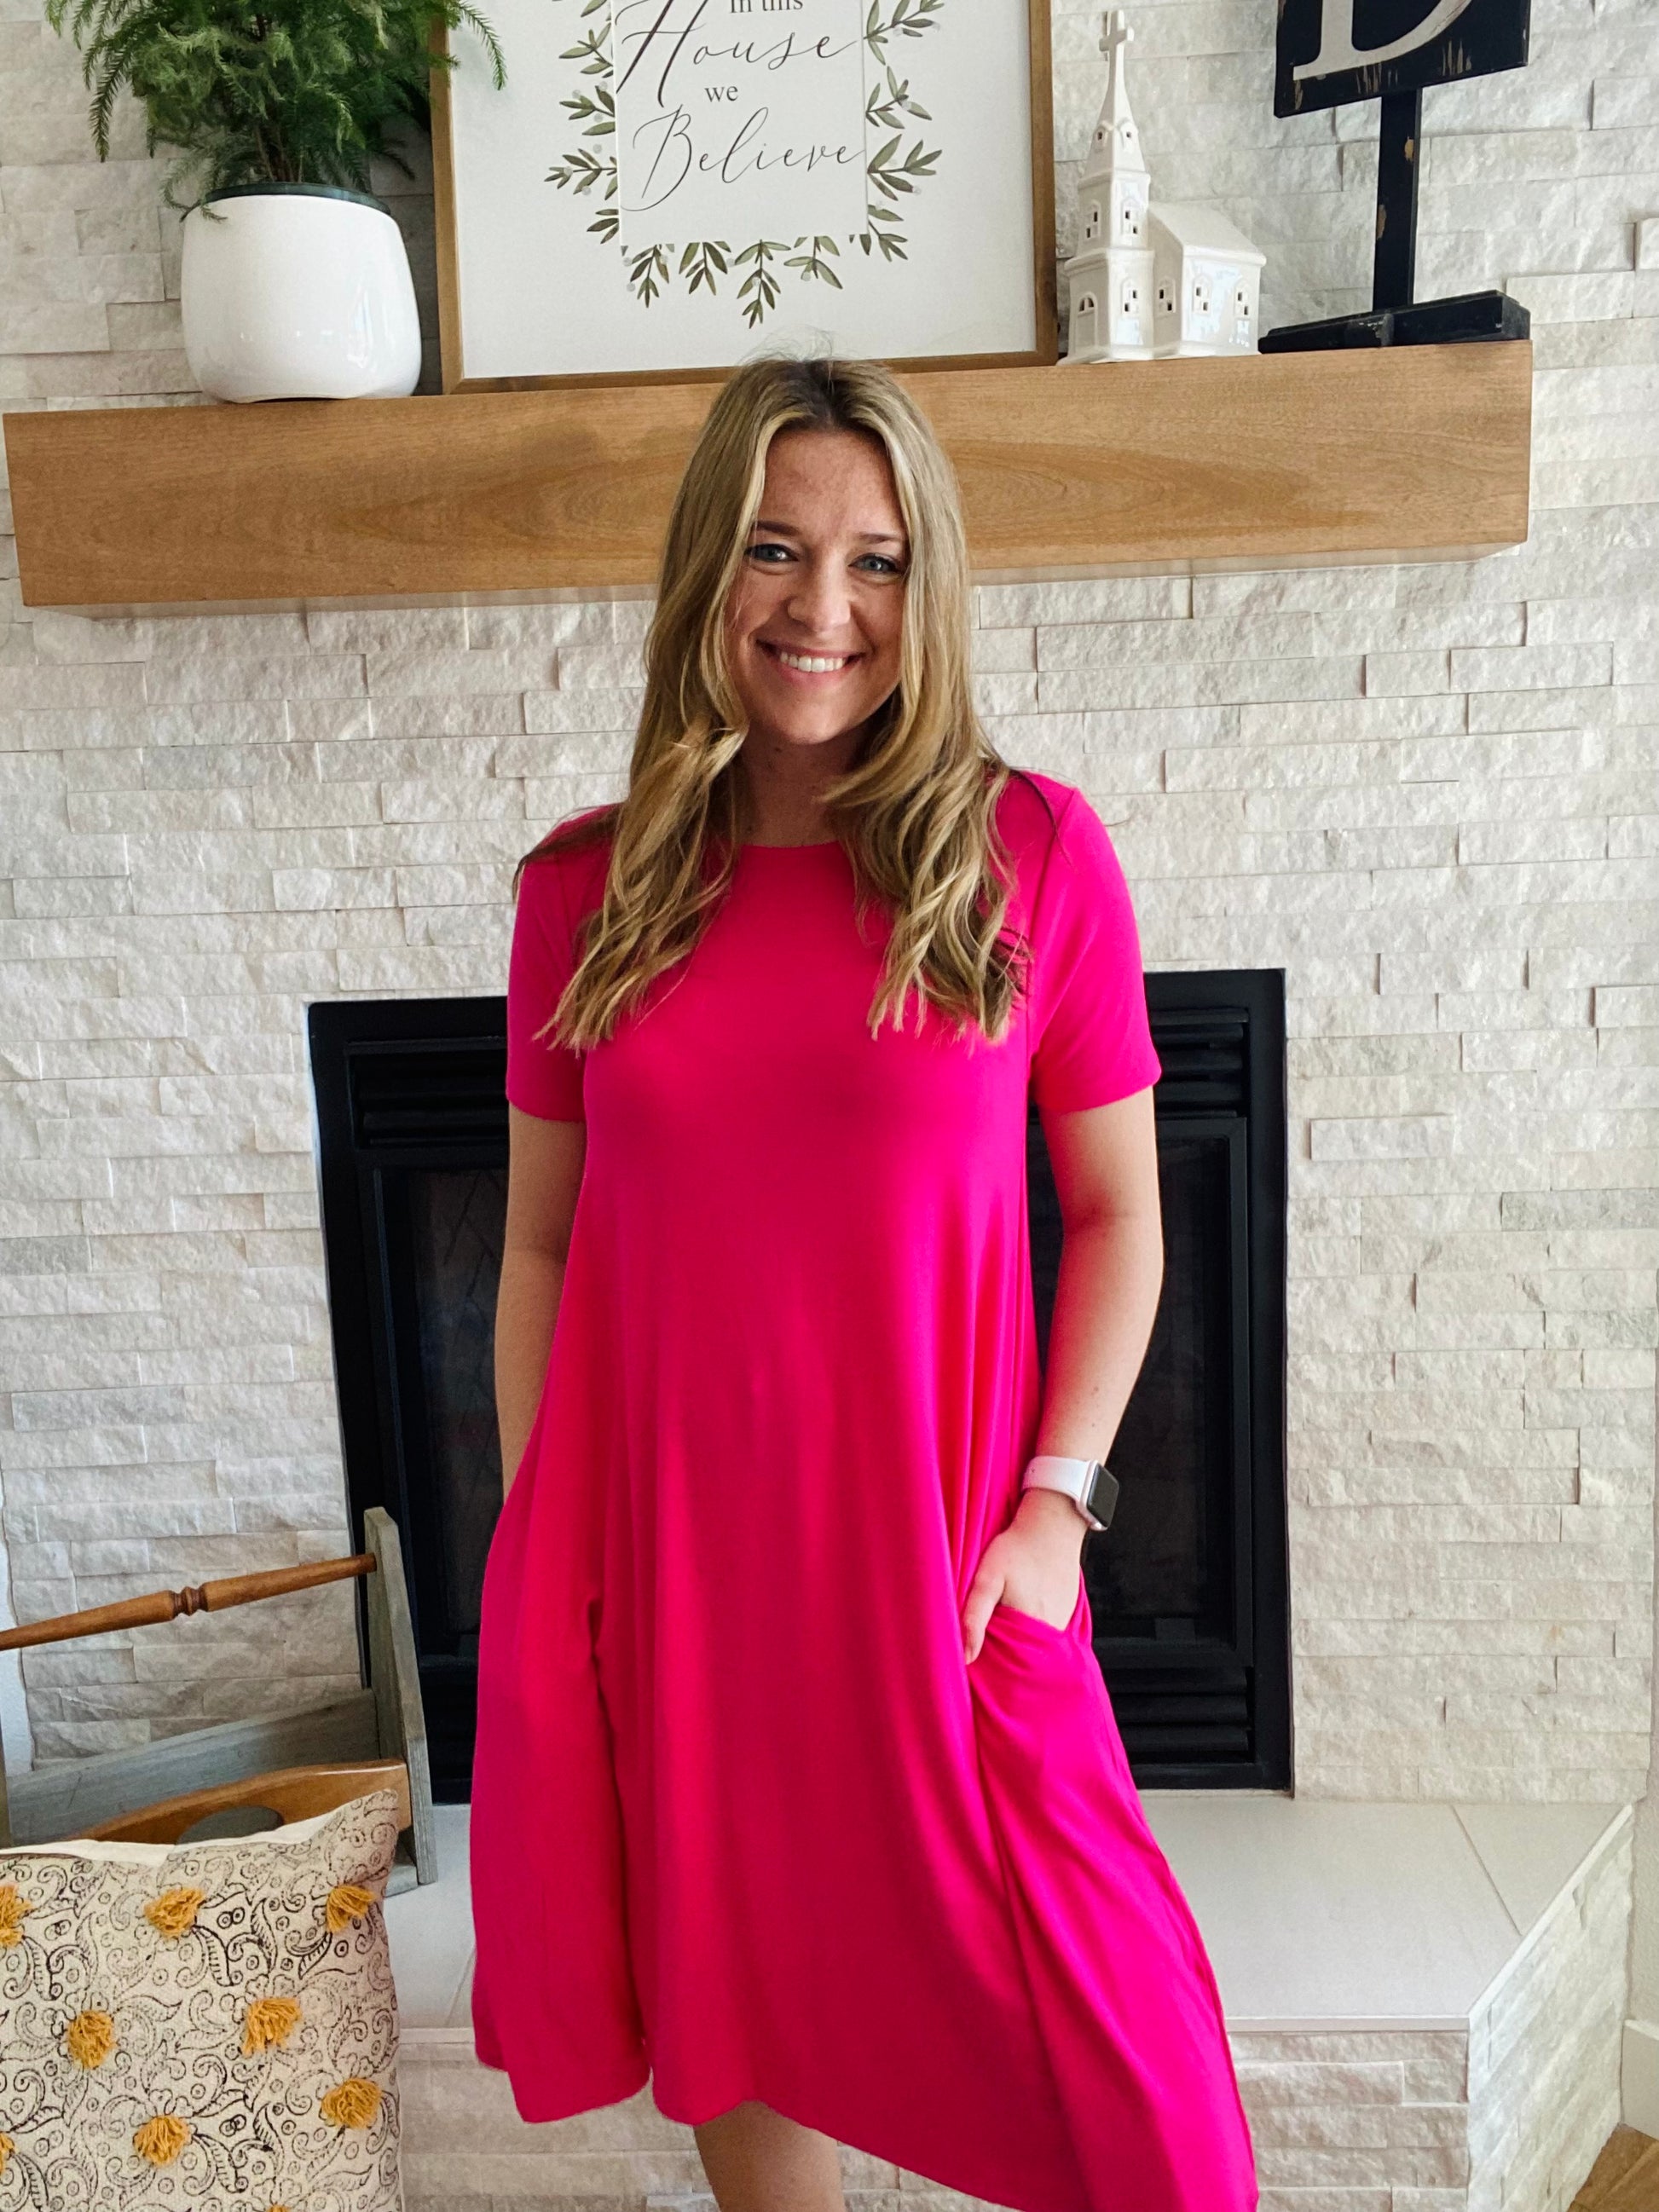 57% Polyester, 38% Rayon, 5% Spandex fits TTS - Sophie is 5'4" and wearing the small.  The #1 summer wardrobe staple! Dress up with heals, a jean jacket, and fun jewelry or dress it down with sneakers or as a swim coverup!